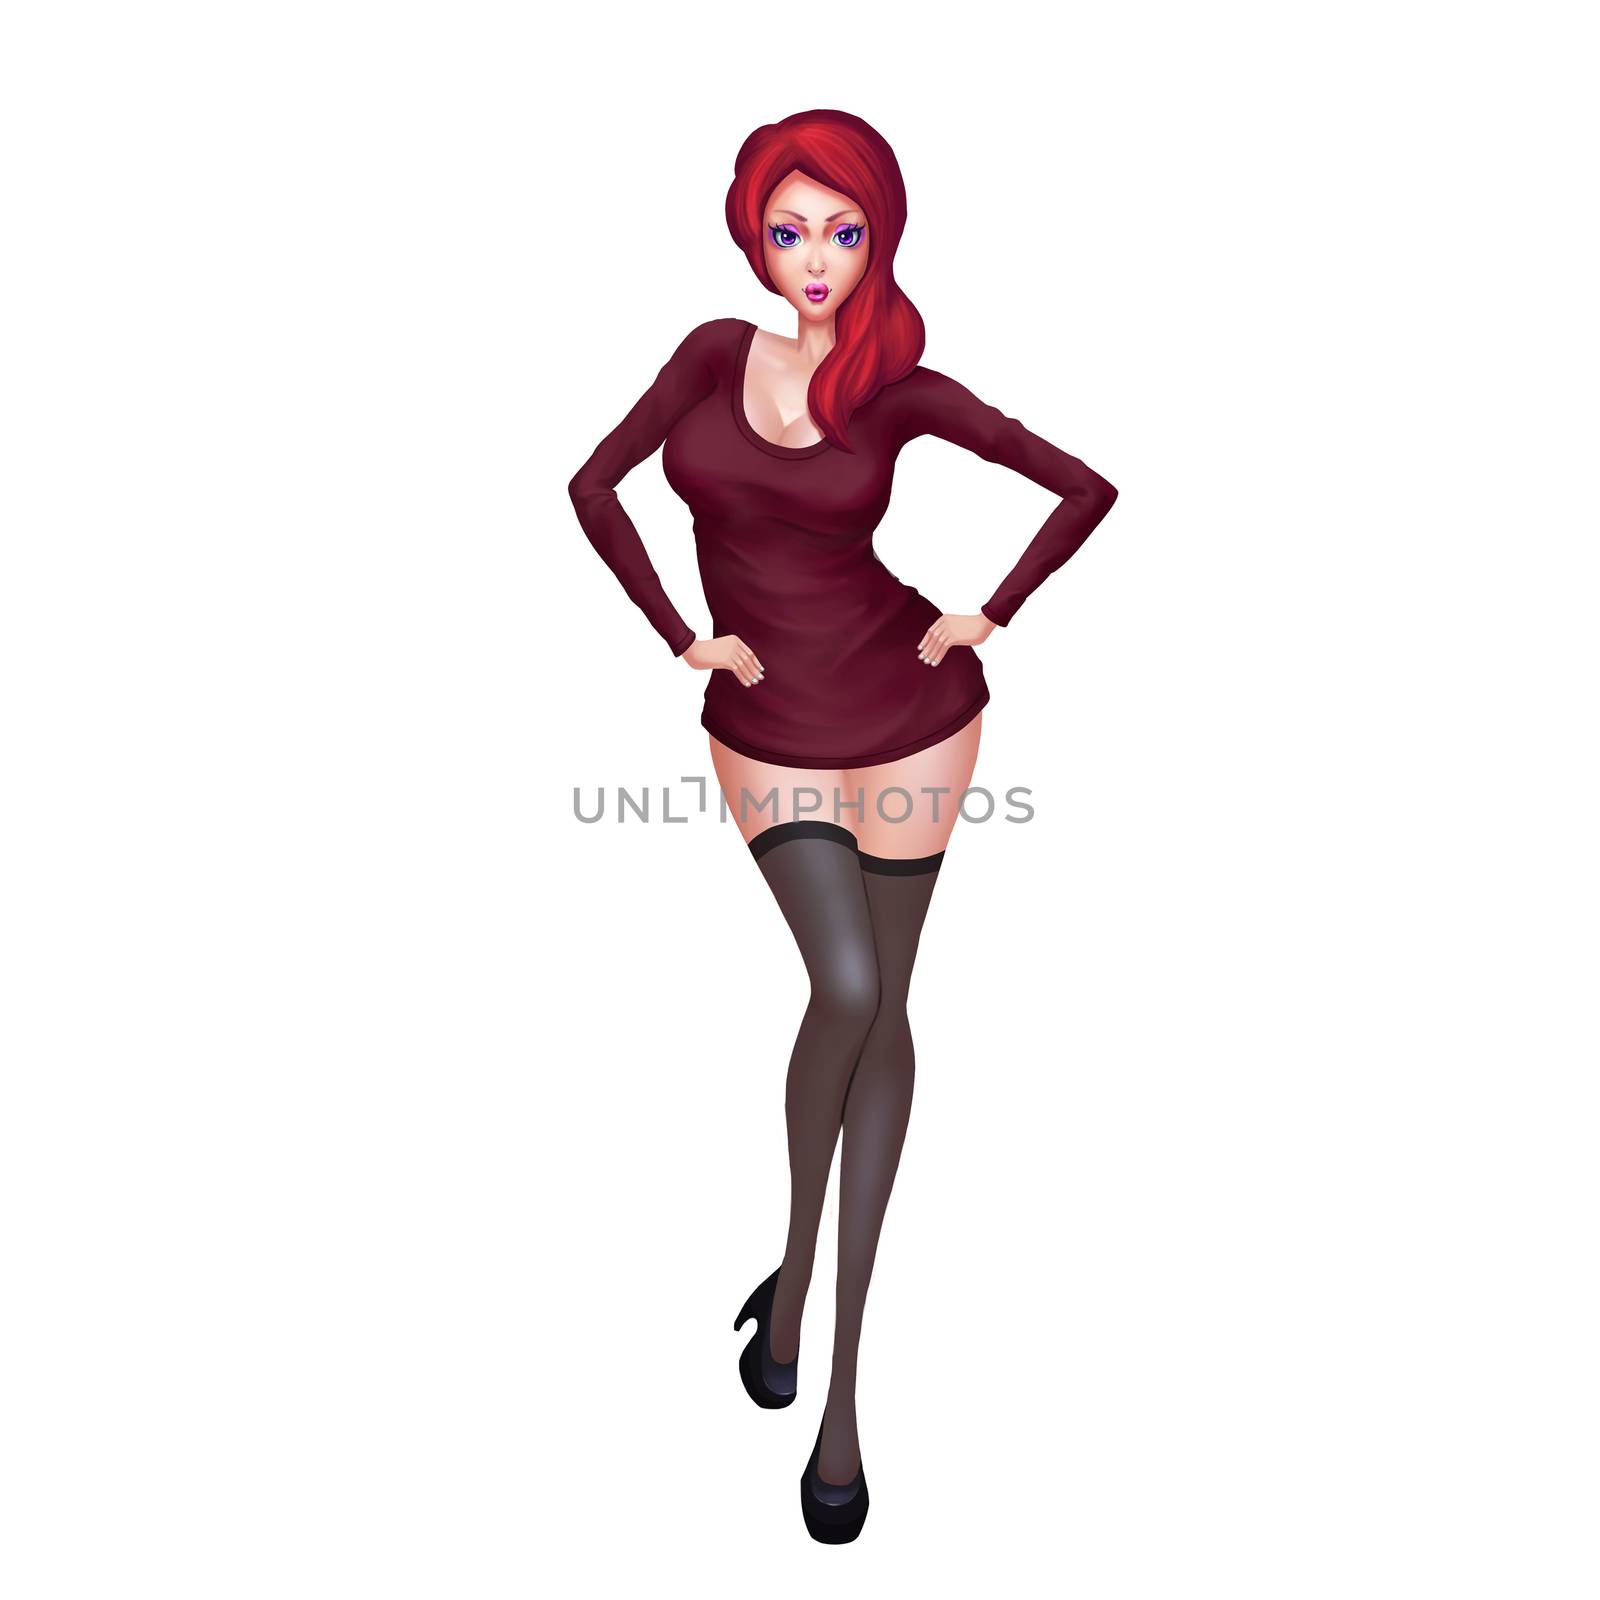 High Definition Illustration: Seductive Woman with Fewer and Fewer Clothes Series 2. Realistic Cartoon Style Character Design. by NextMars